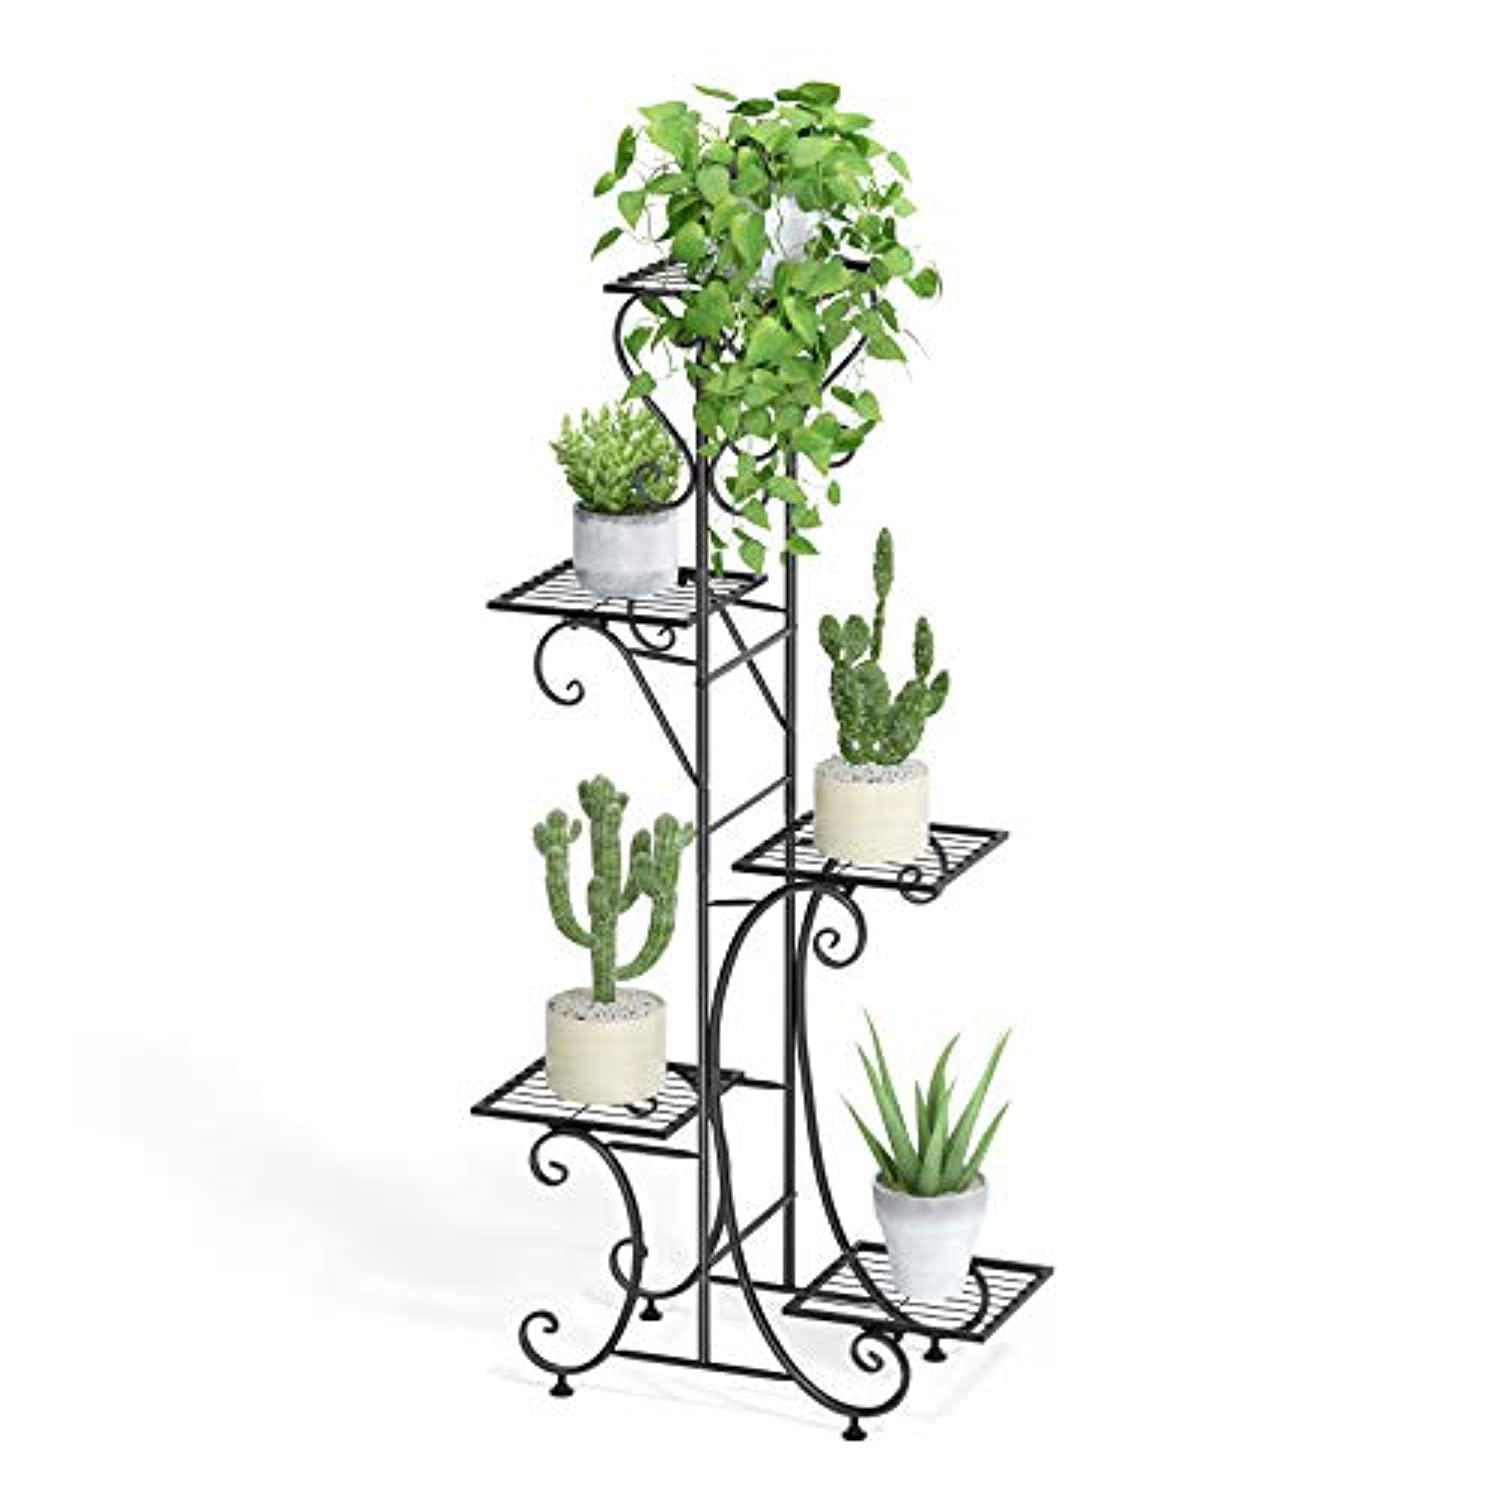 Unho Tall Plant Stand Indoor, Metal Plant Stand With Shelves